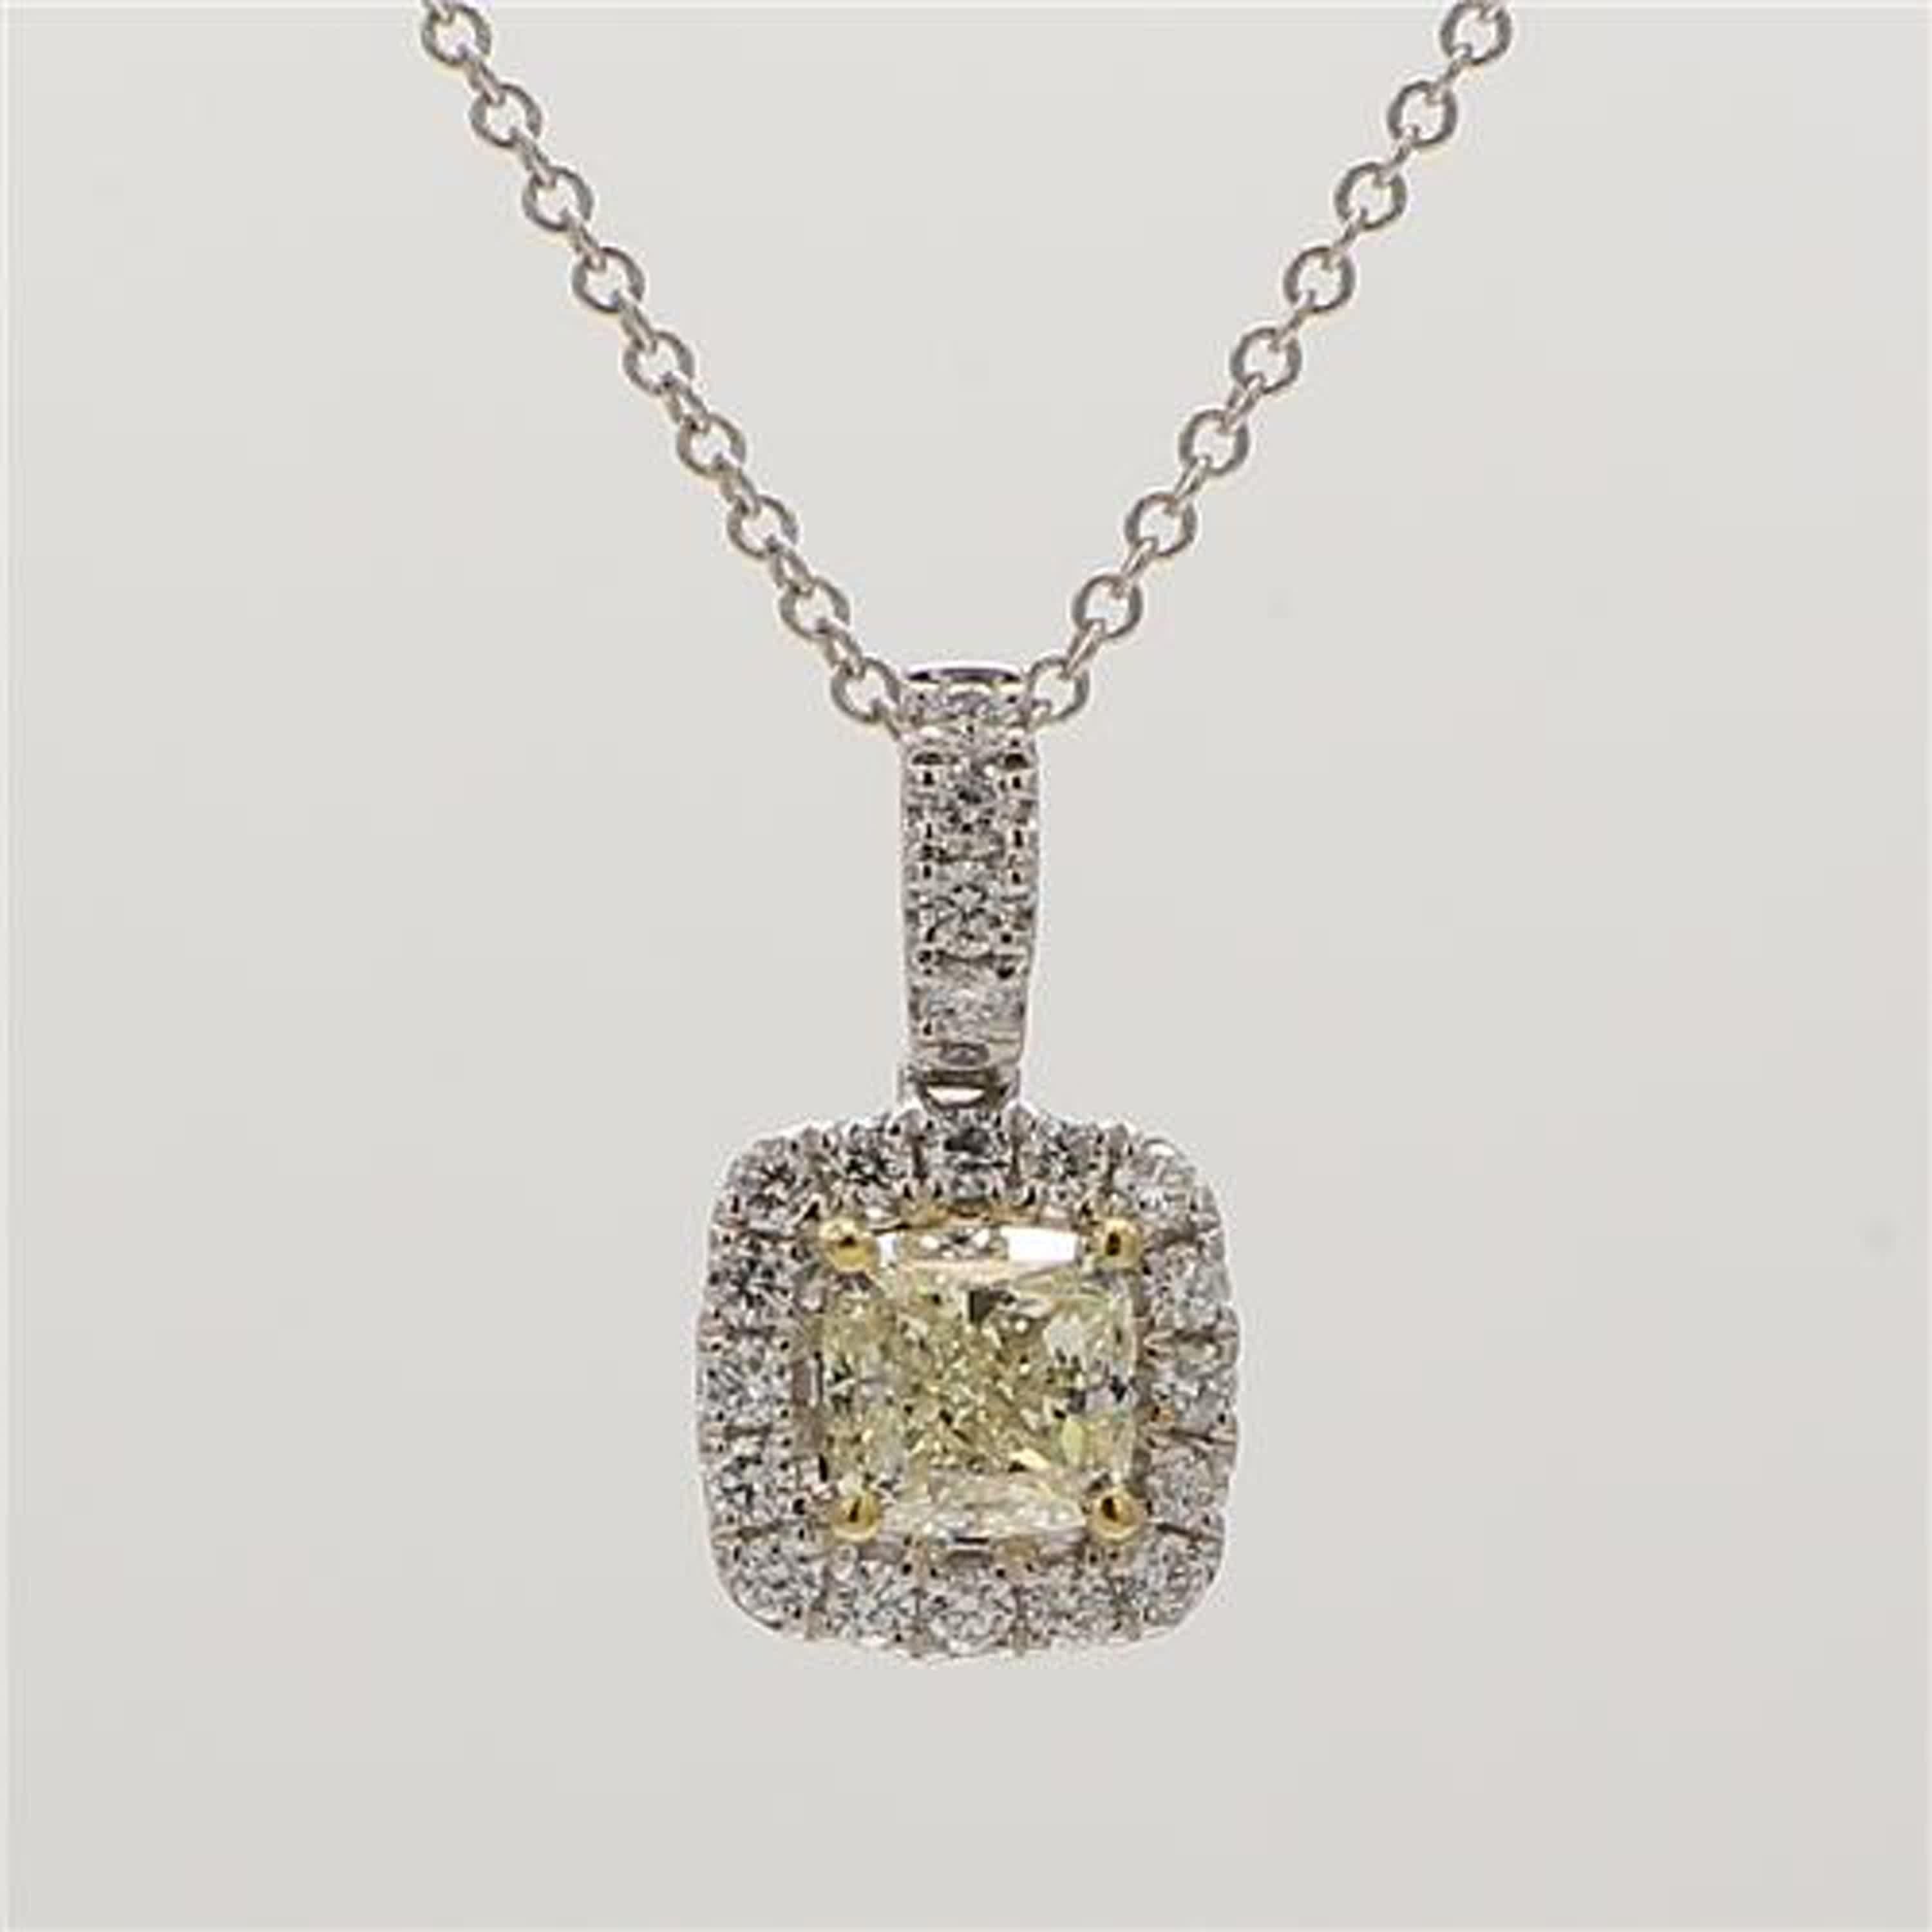 RareGemWorld's classic diamond pendant. Mounted in a beautiful 18K Yellow and White Gold setting with a natural cushion cut yellow diamond. The yellow diamond is surrounded by small round natural white diamond melee. This pendant is guaranteed to